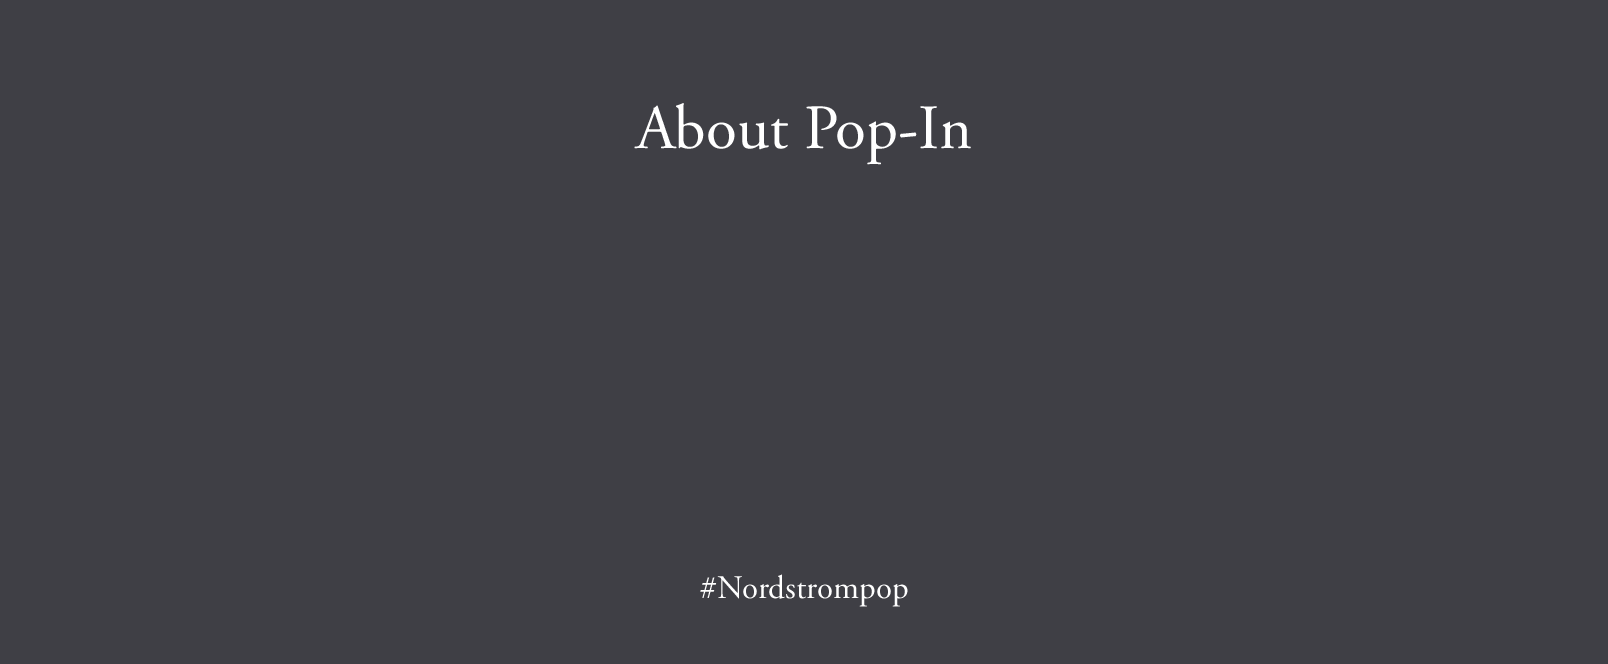 Pop-In@Nordstrom is an ongoing series of limited-time pop-up shops curated by Olivia Kim. Each shop presents new and exclusive products, designers and content built around a different theme or collaboration. Past Pop-In themes include poolside glamour, K-beauty, Paris, Earth Day, pets, '90s raves and road trips, to name a few—plus partnerships with HAY, goop, Aesop, Eileen Fisher, Nike, The North Face, Poketo and more. Find the Pop-In at selected stores and online at Nordstrom.ca/POP—and come back to visit us every month or so for a totally new Pop-In@Nordstrom.